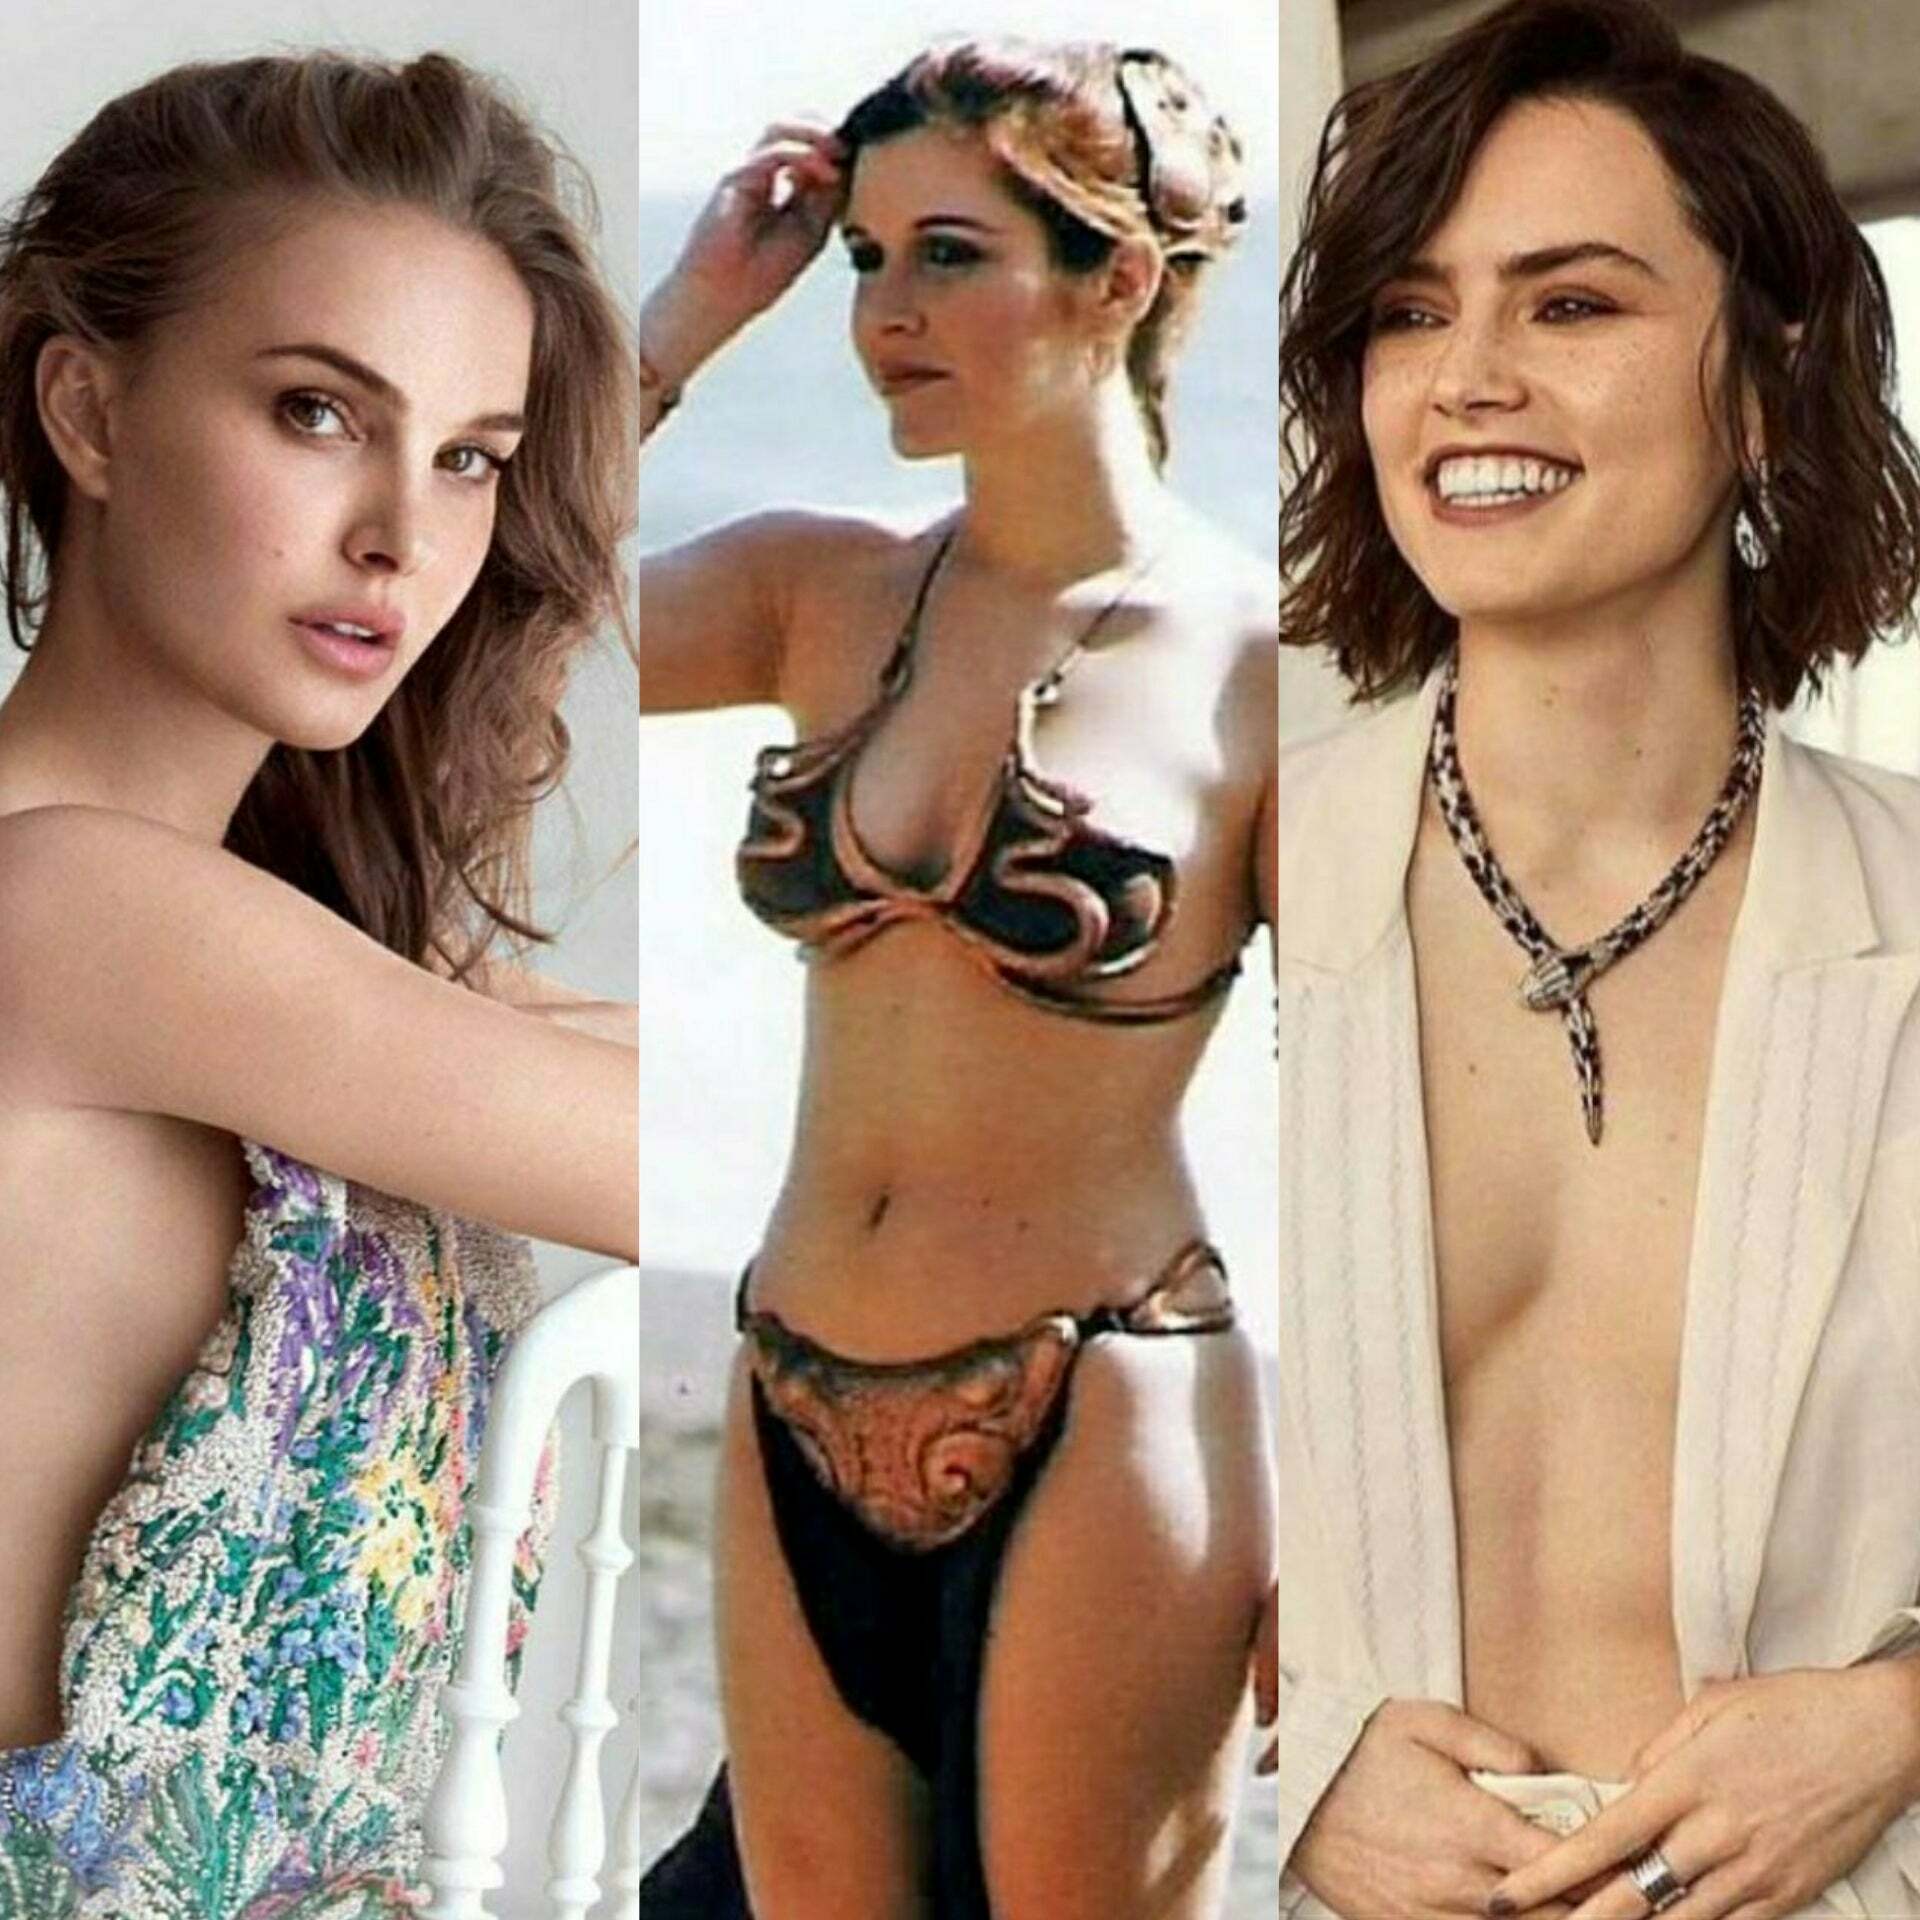 Anyone here for the Women of Star Wars? (Natalie Portman, Carrie Fisher, Daisy Ridley)